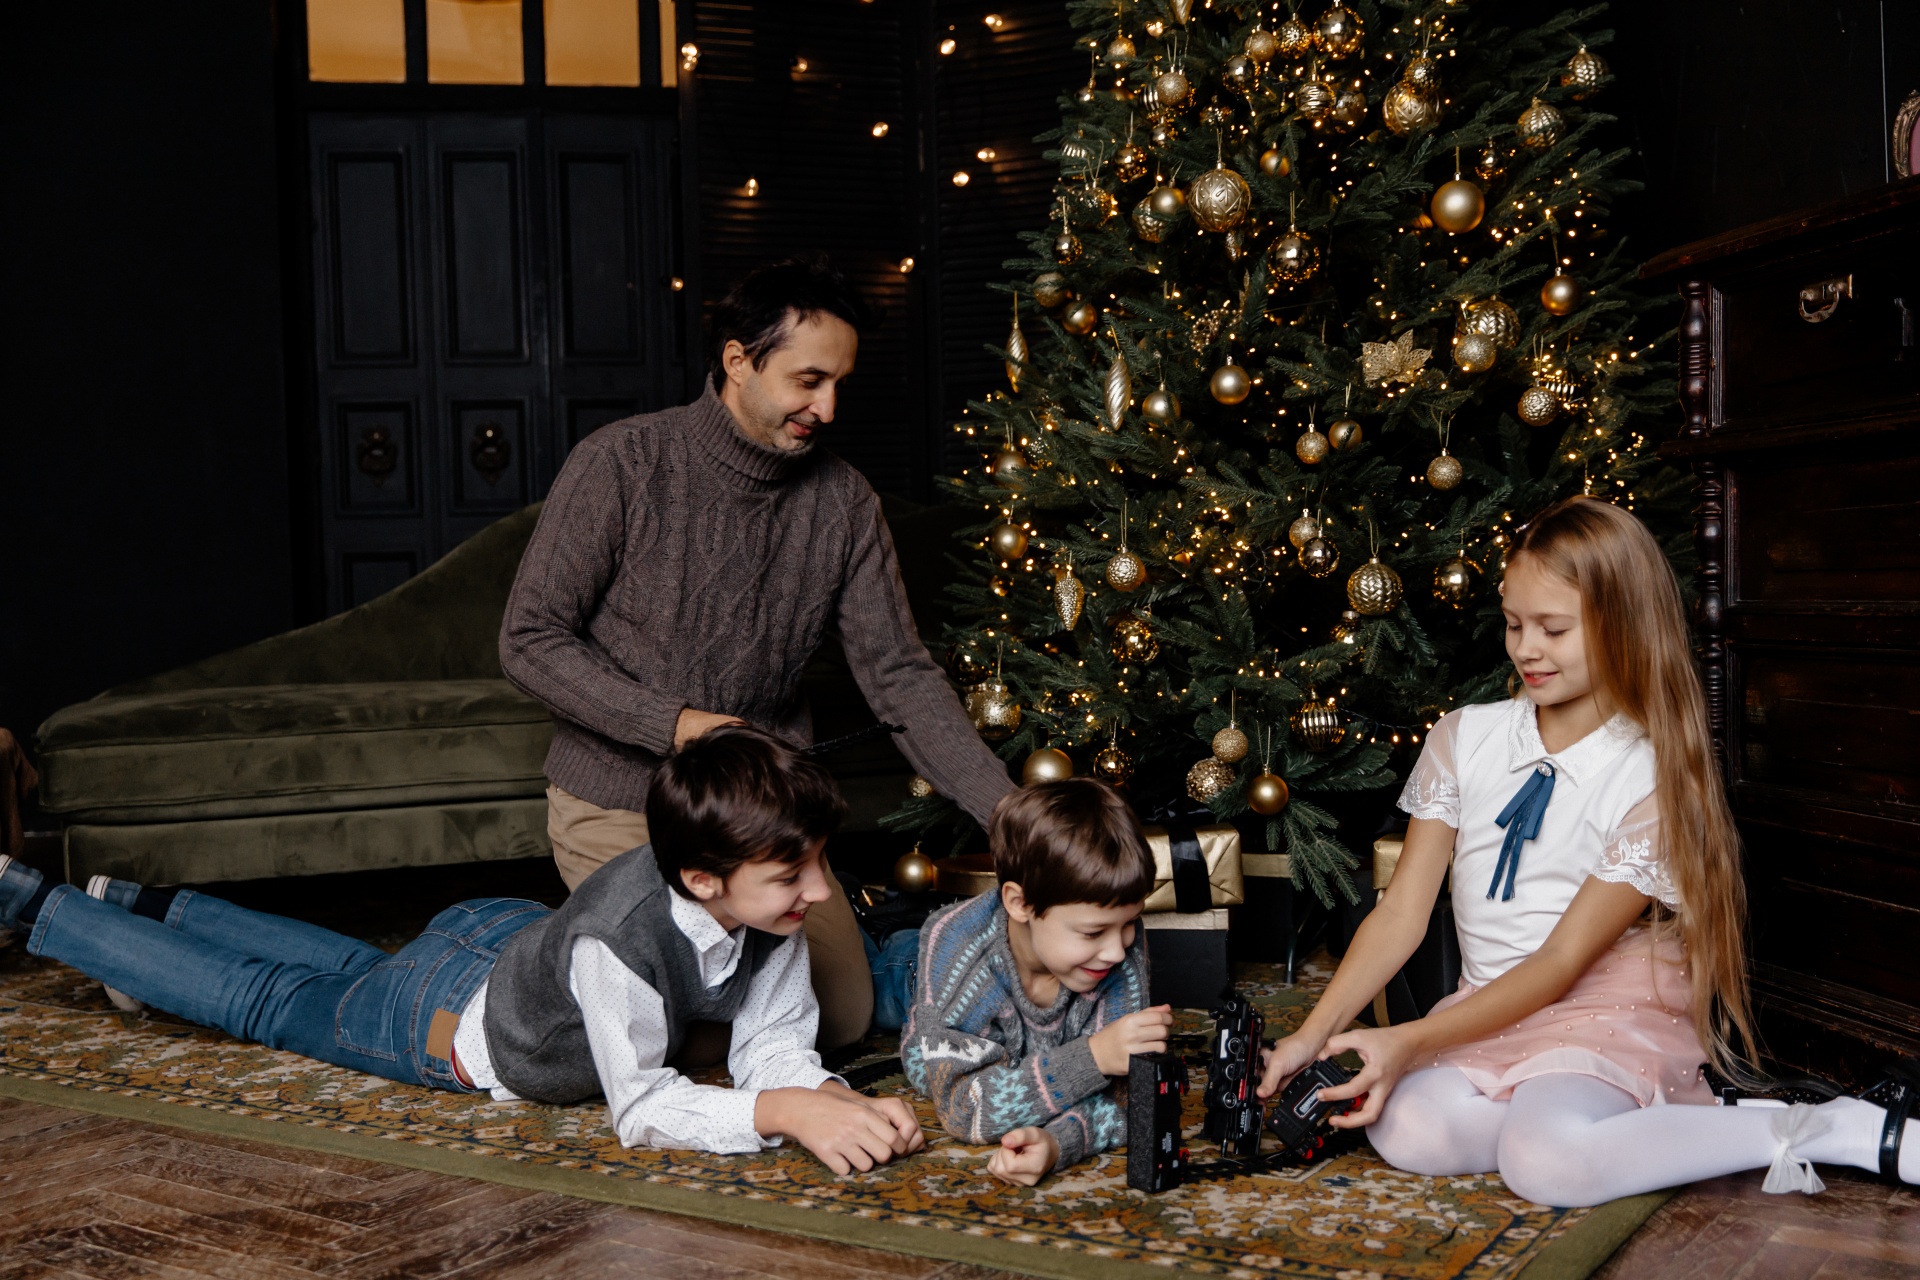 father, dad, boys, girl, brothers, sisters, children, family, railroad, toys, christmas, new year, holiday, tree, gifts, congratulations, december 31, evening, living room, decorations, party